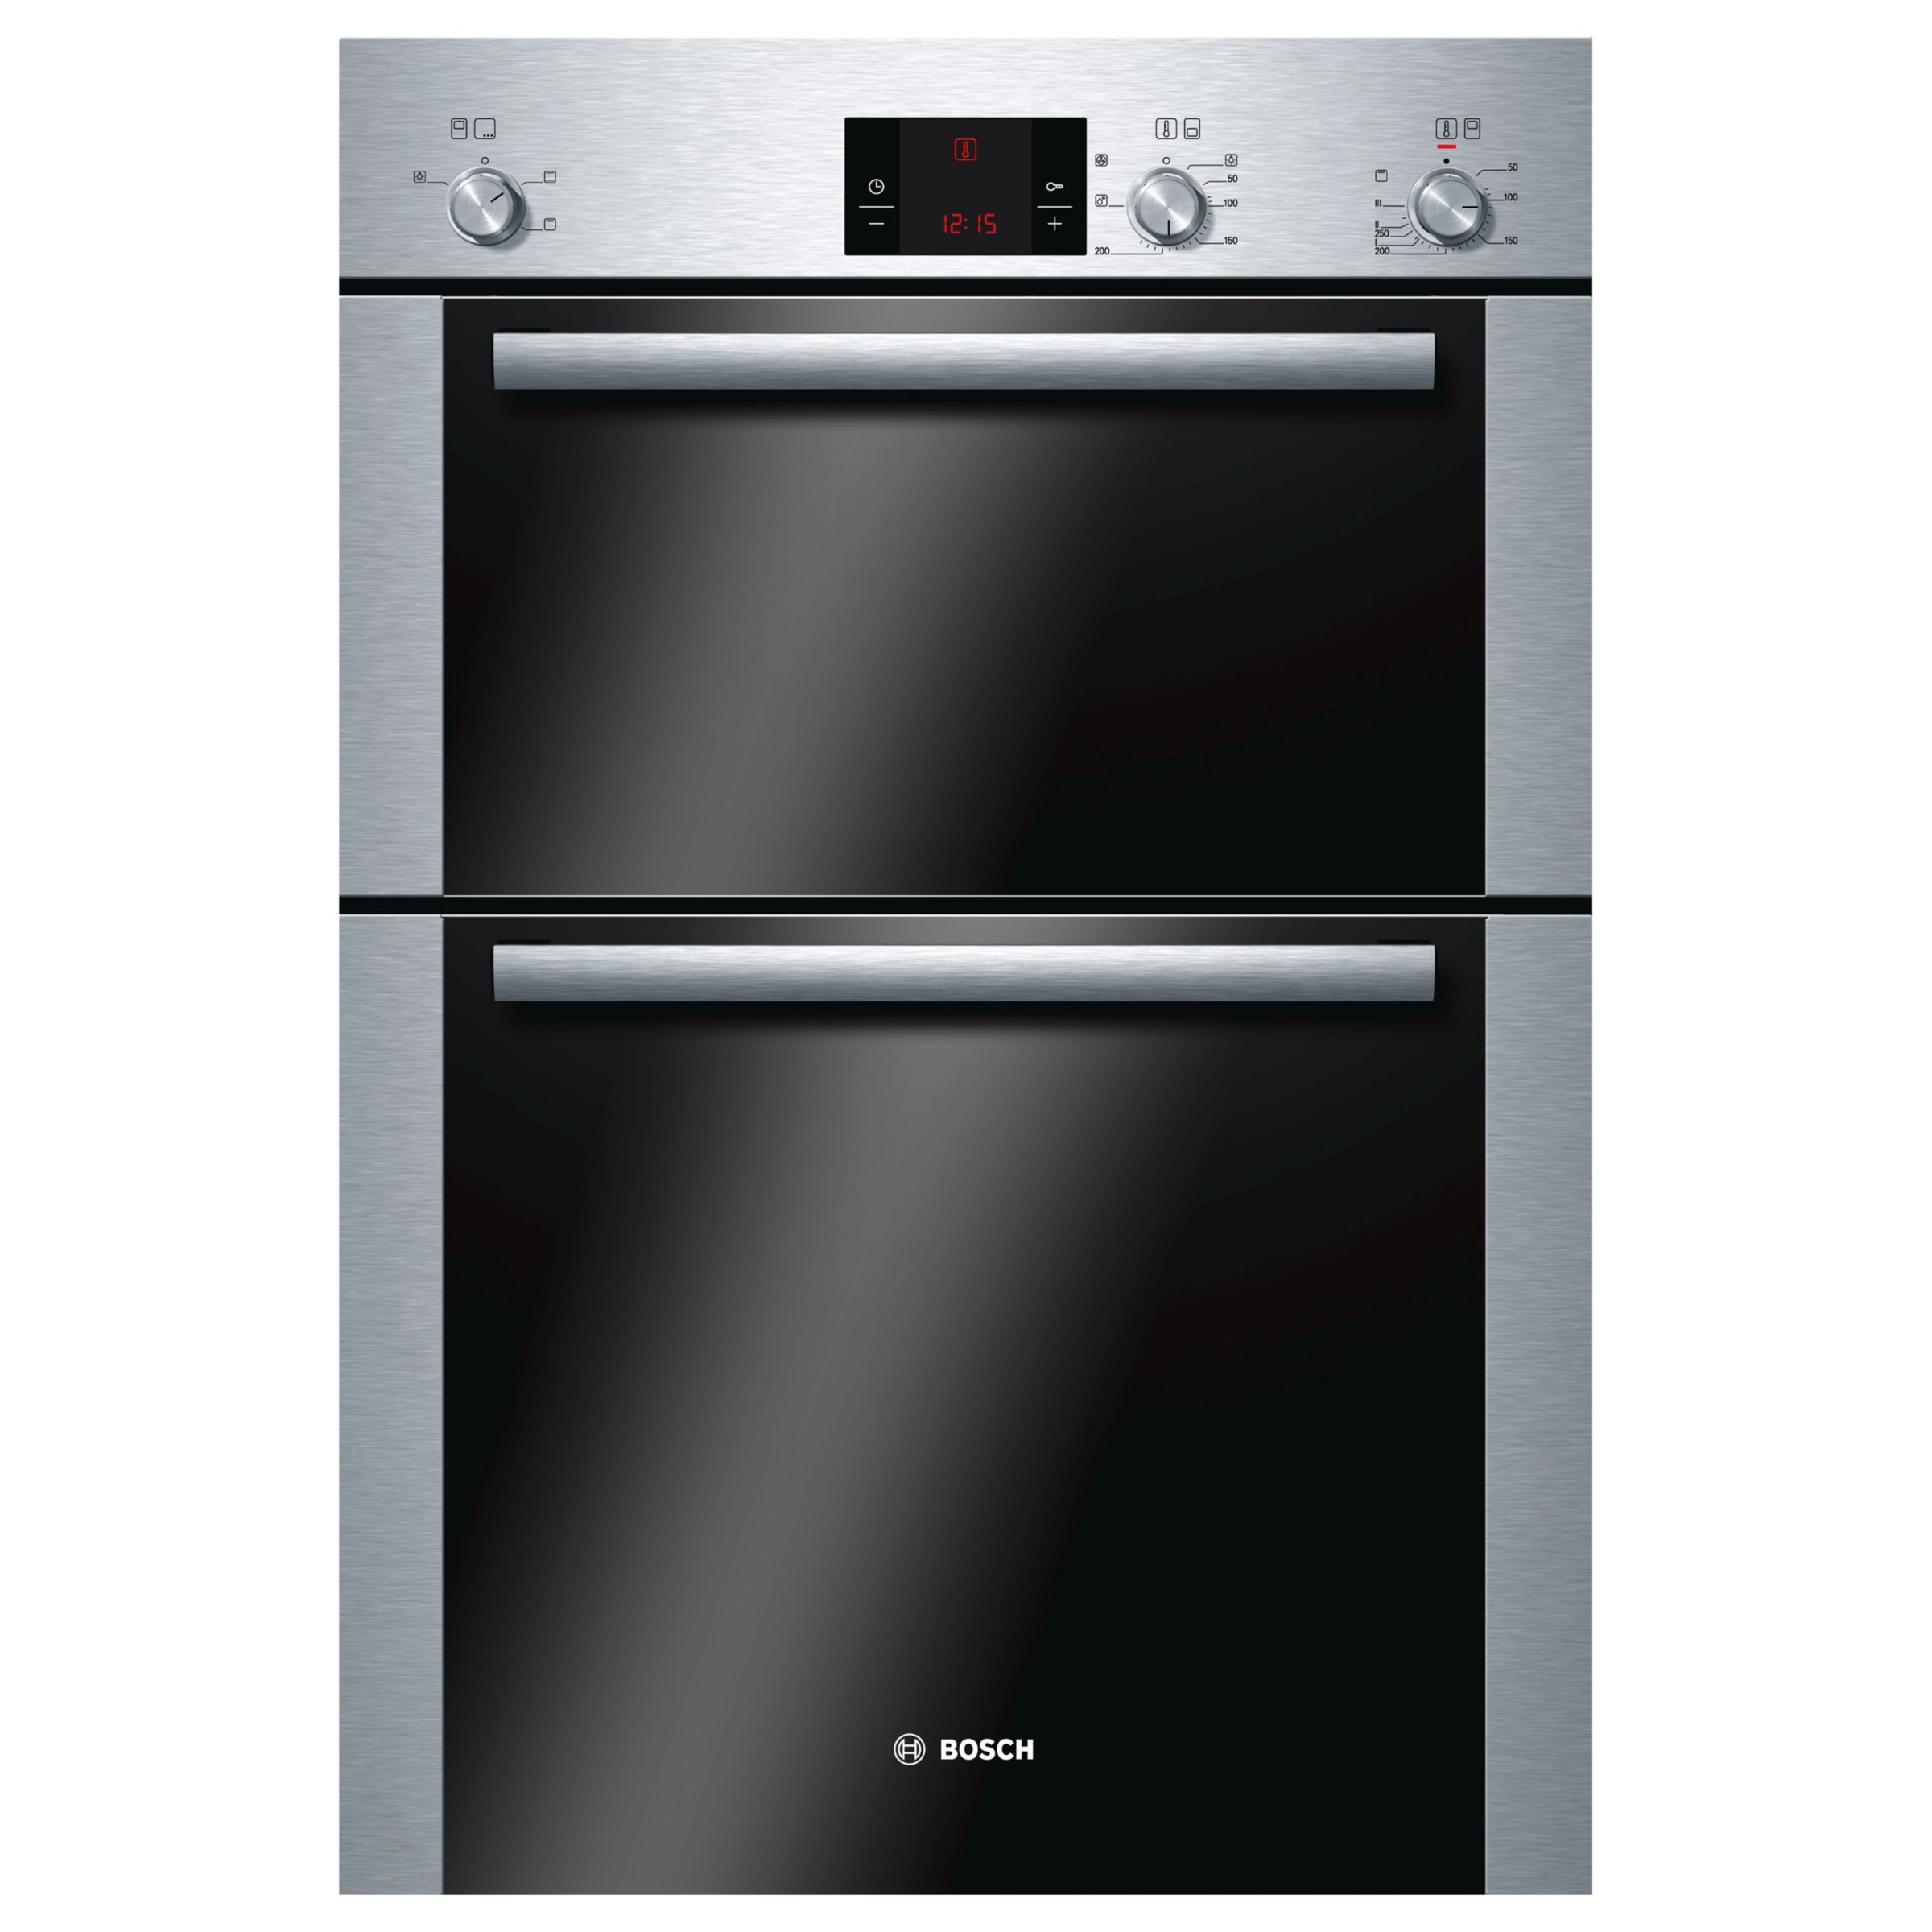 Bosch HBM13B251B Double Electric Oven, Stainless Steel at John Lewis